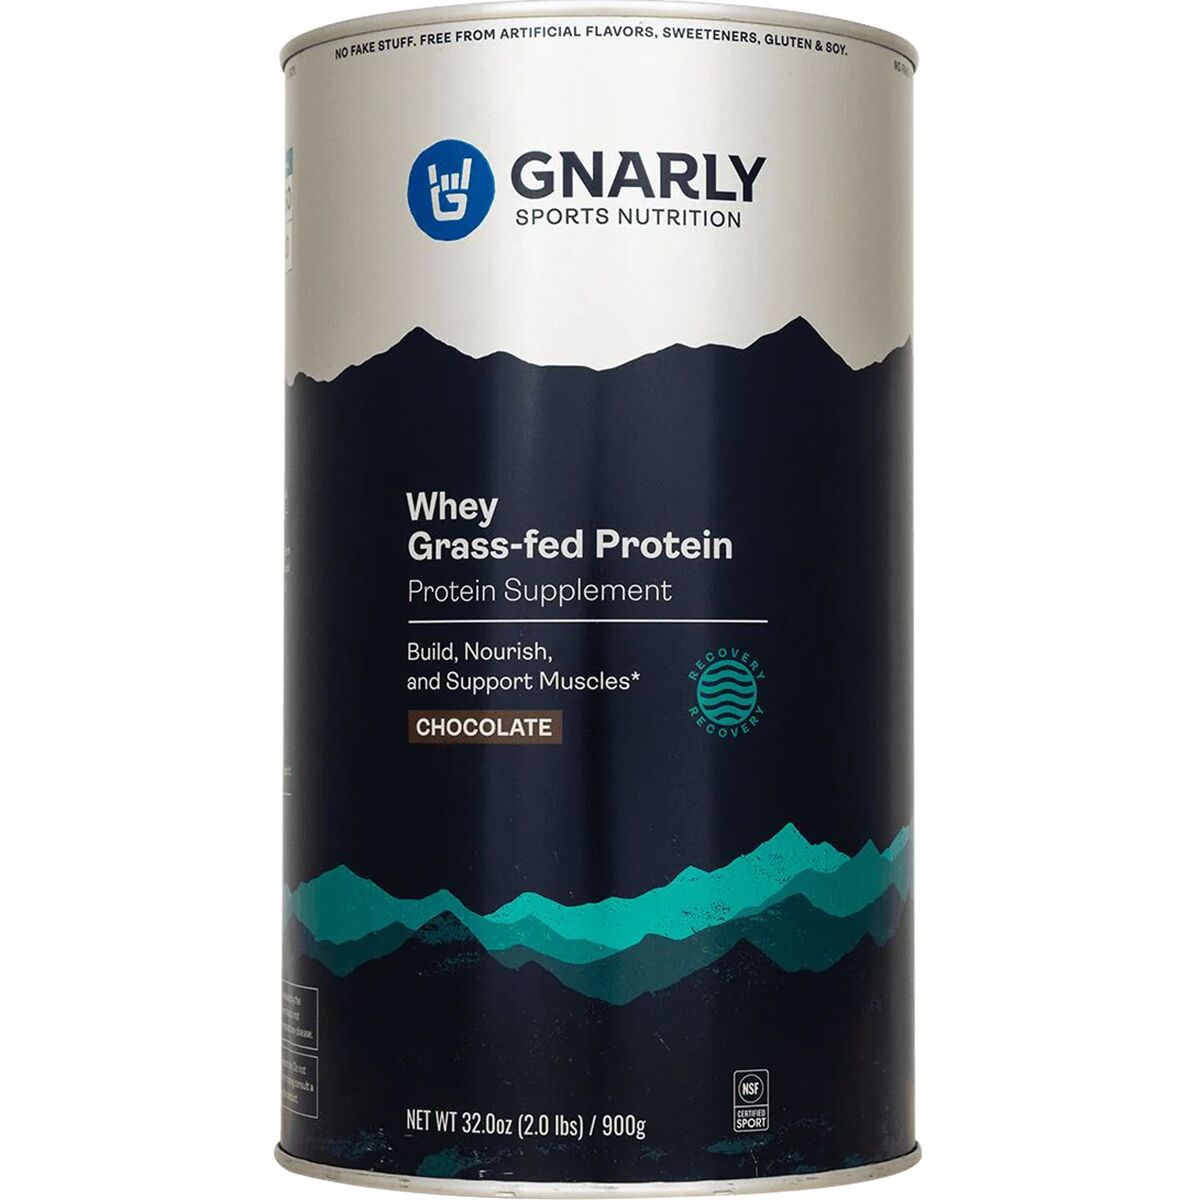 Gnarly Whey Protein